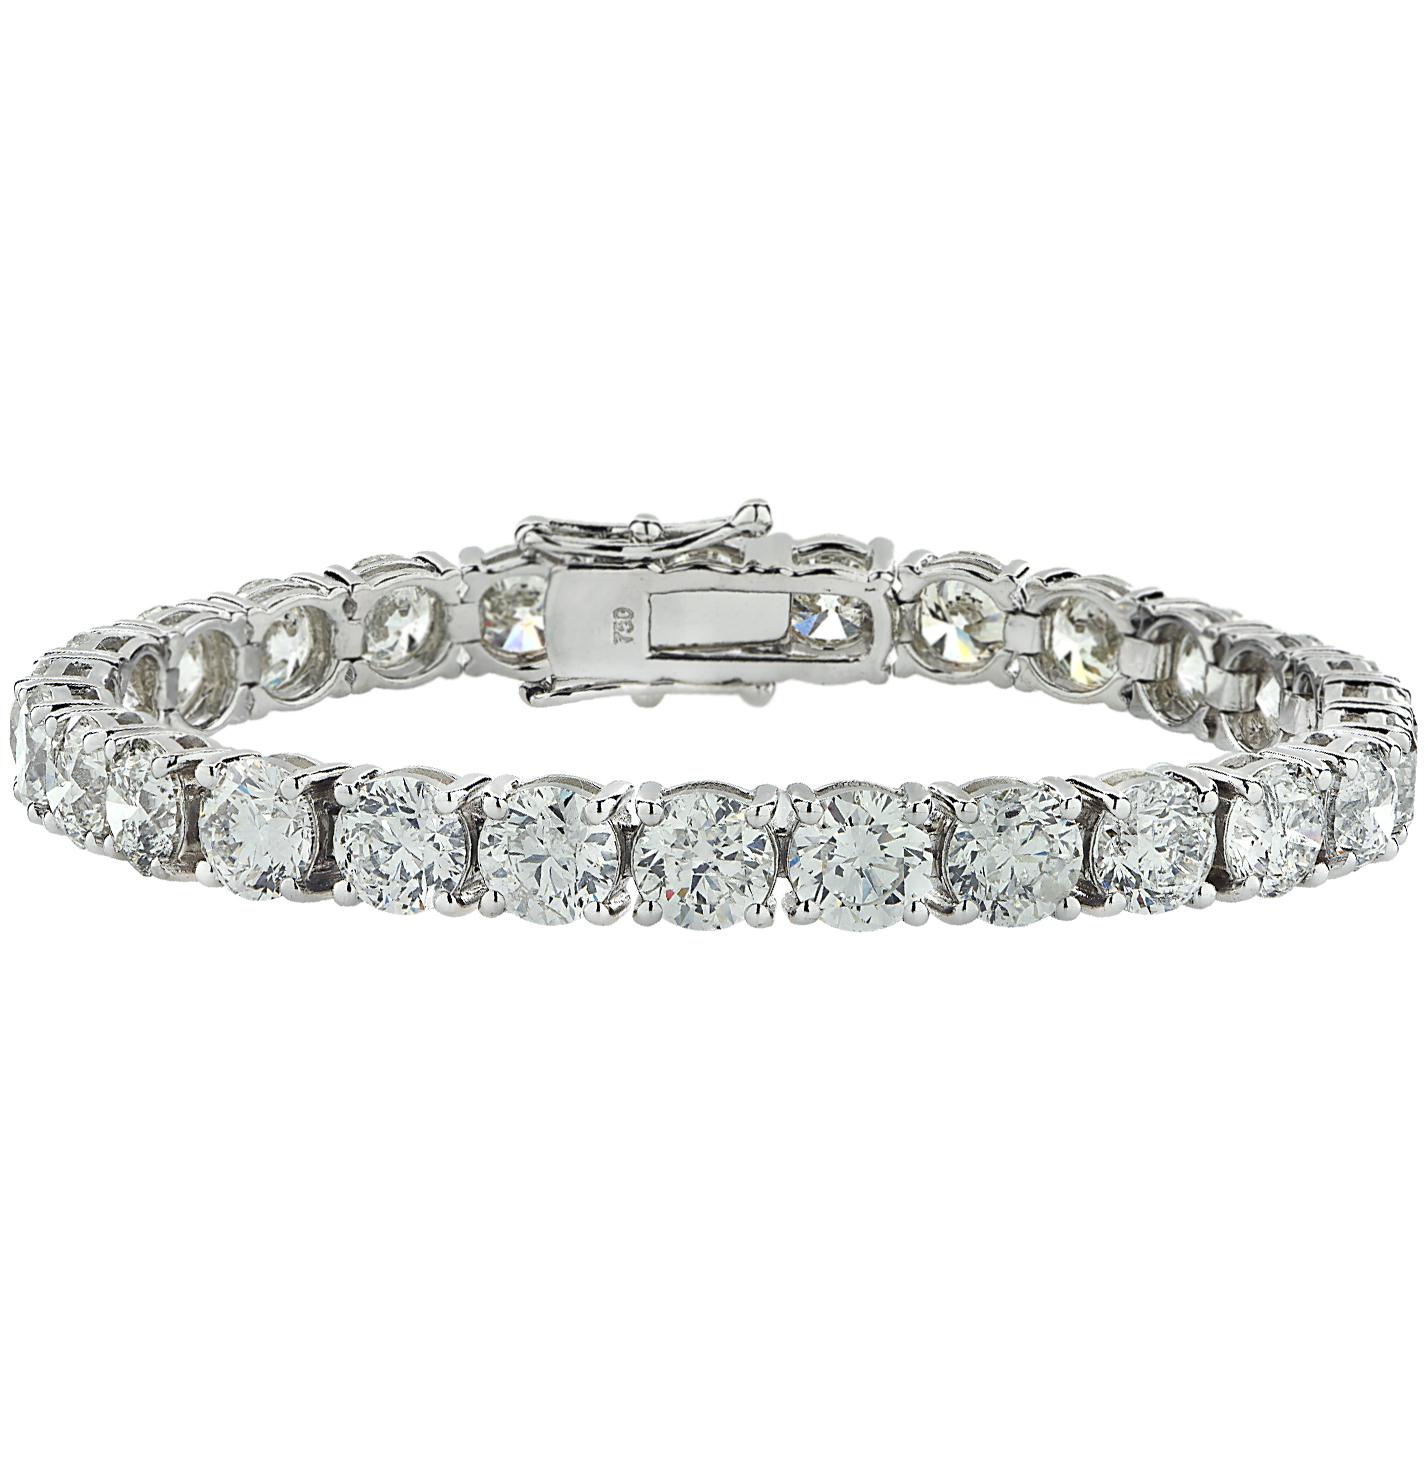 Spectacular bracelet hand crafted in 18k white gold, featuring 27 sensational round brilliant cut diamonds weighing 24.75 carats total, H-J color, SI1-I1 clarity. Each diamond was carefully selected, perfectly matched and set in an endless sea of